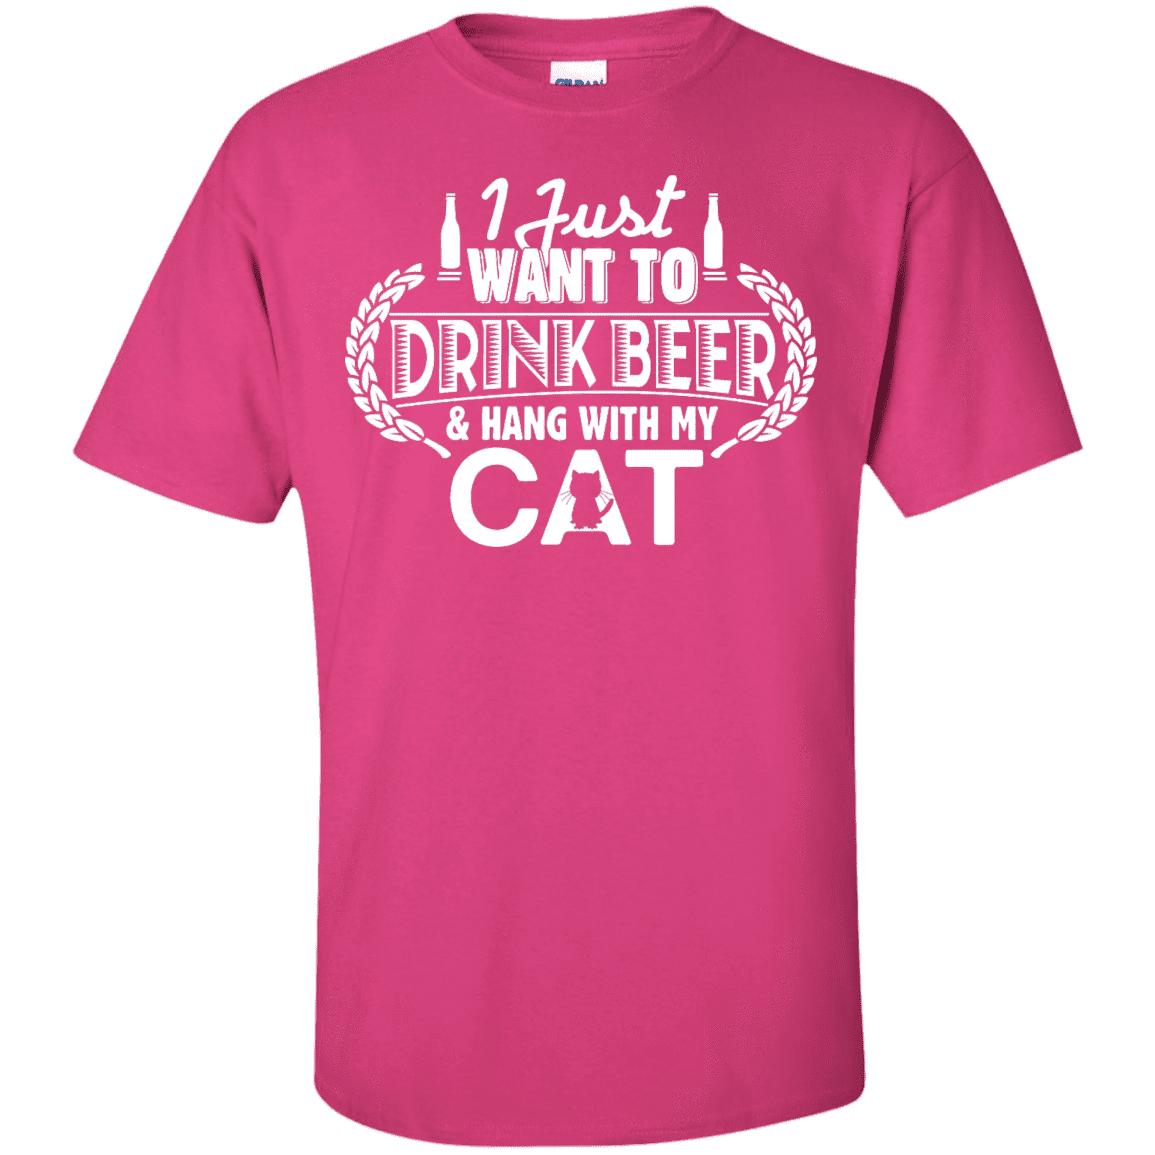 Drink Beer Hang With My Cat - T Shirt.